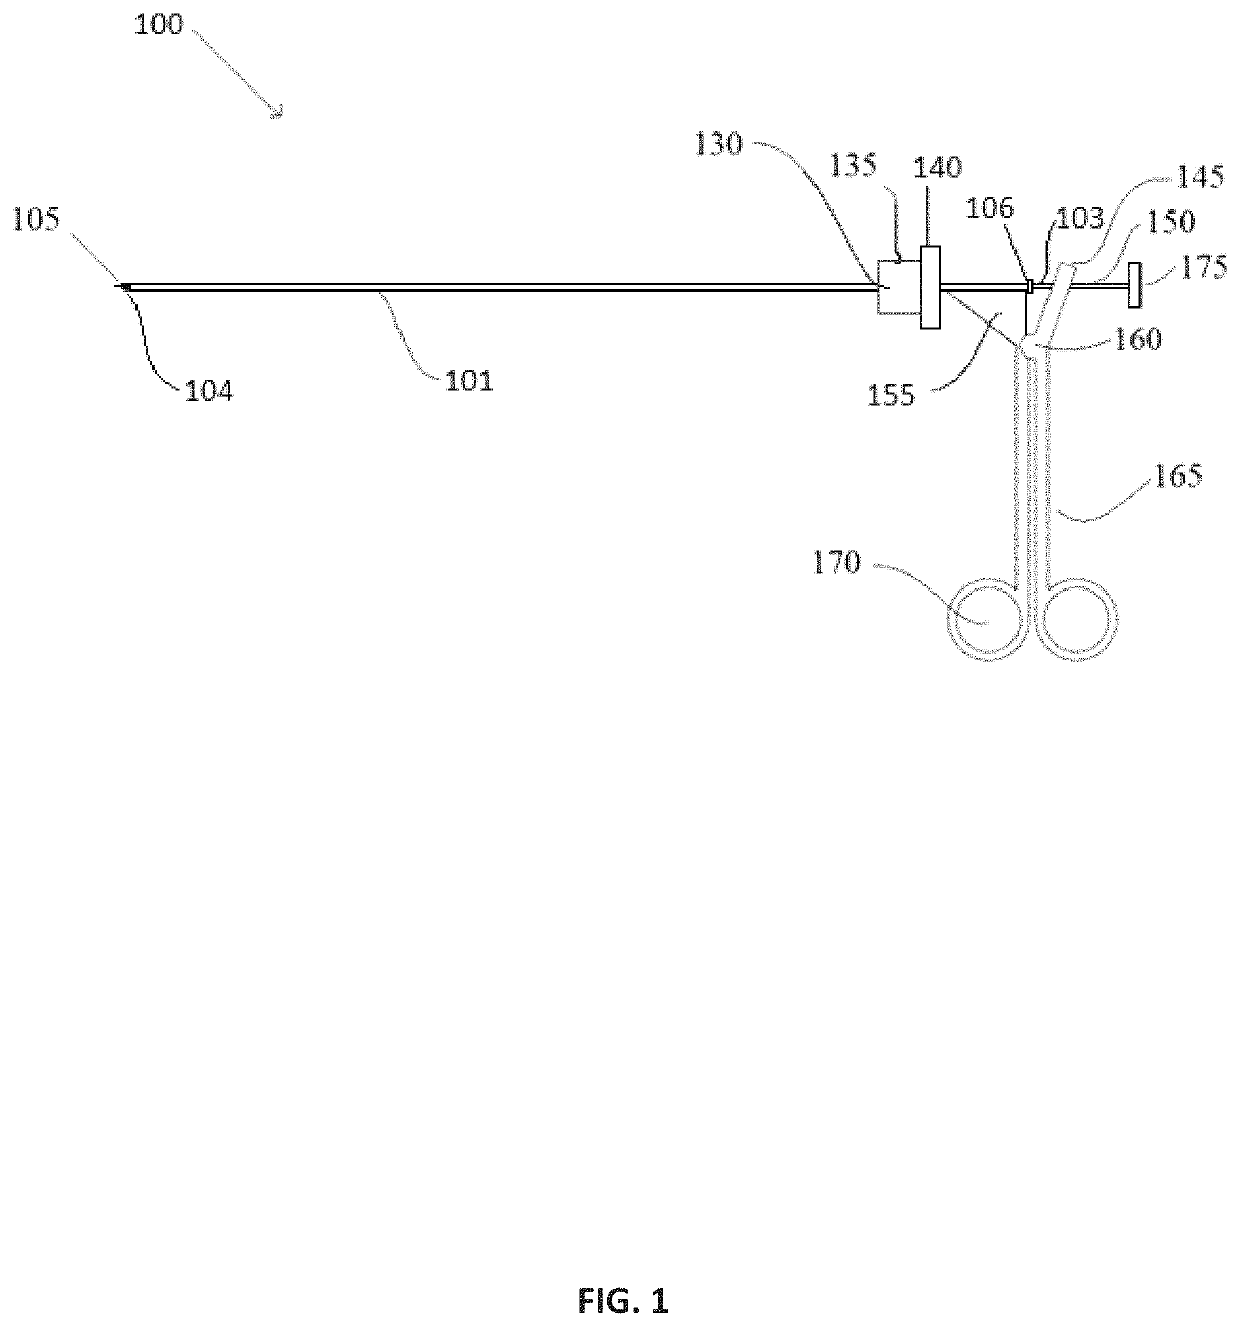 Assembly for doubly securing needlescopic instrument shafts to laparoscopic instrument heads